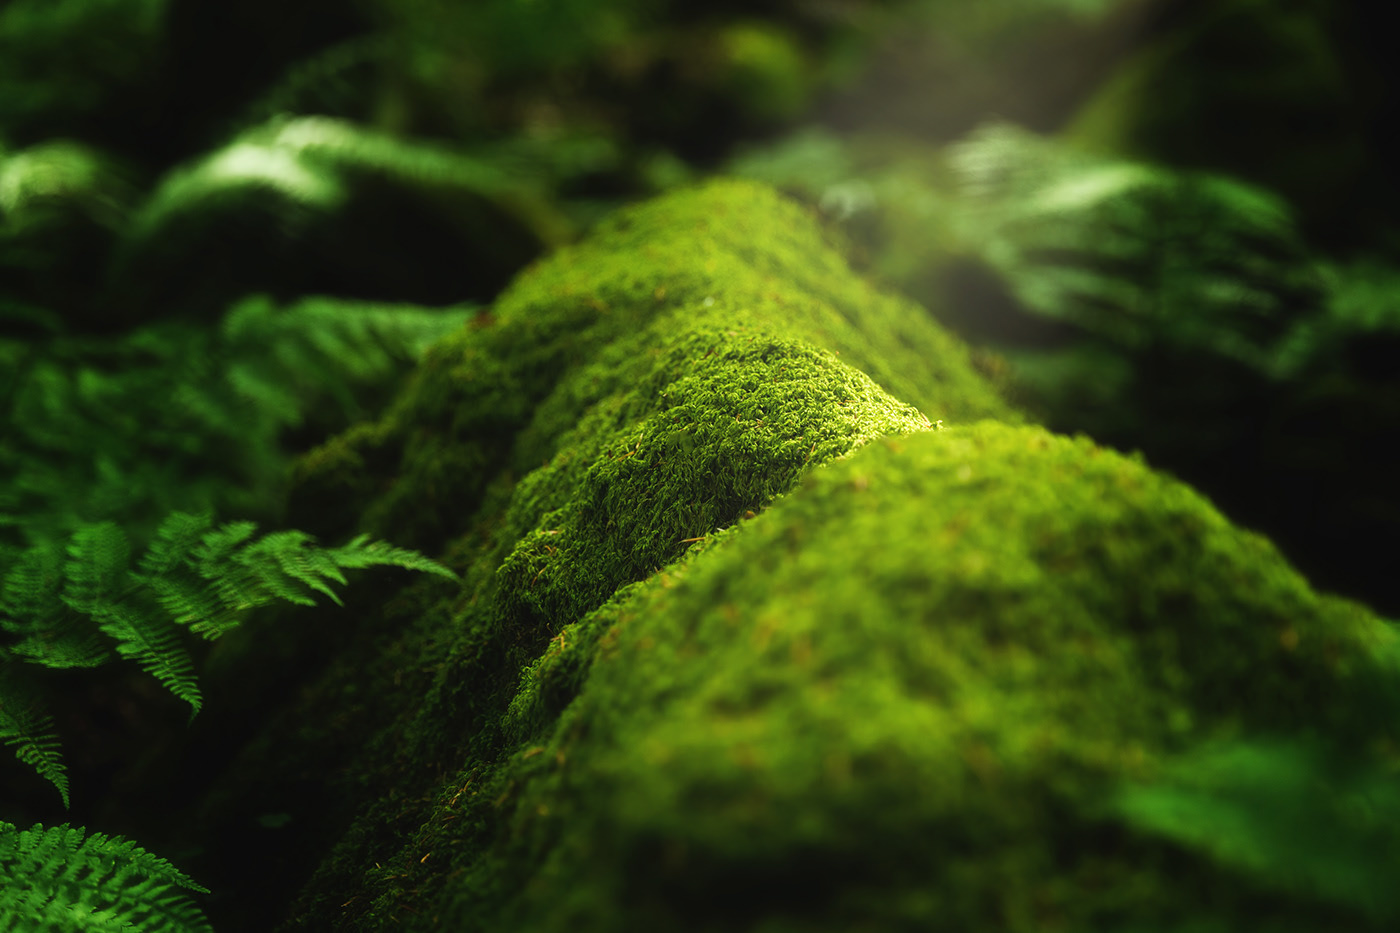 A closeup shot of moss and plants growing on a tree branch in the forest